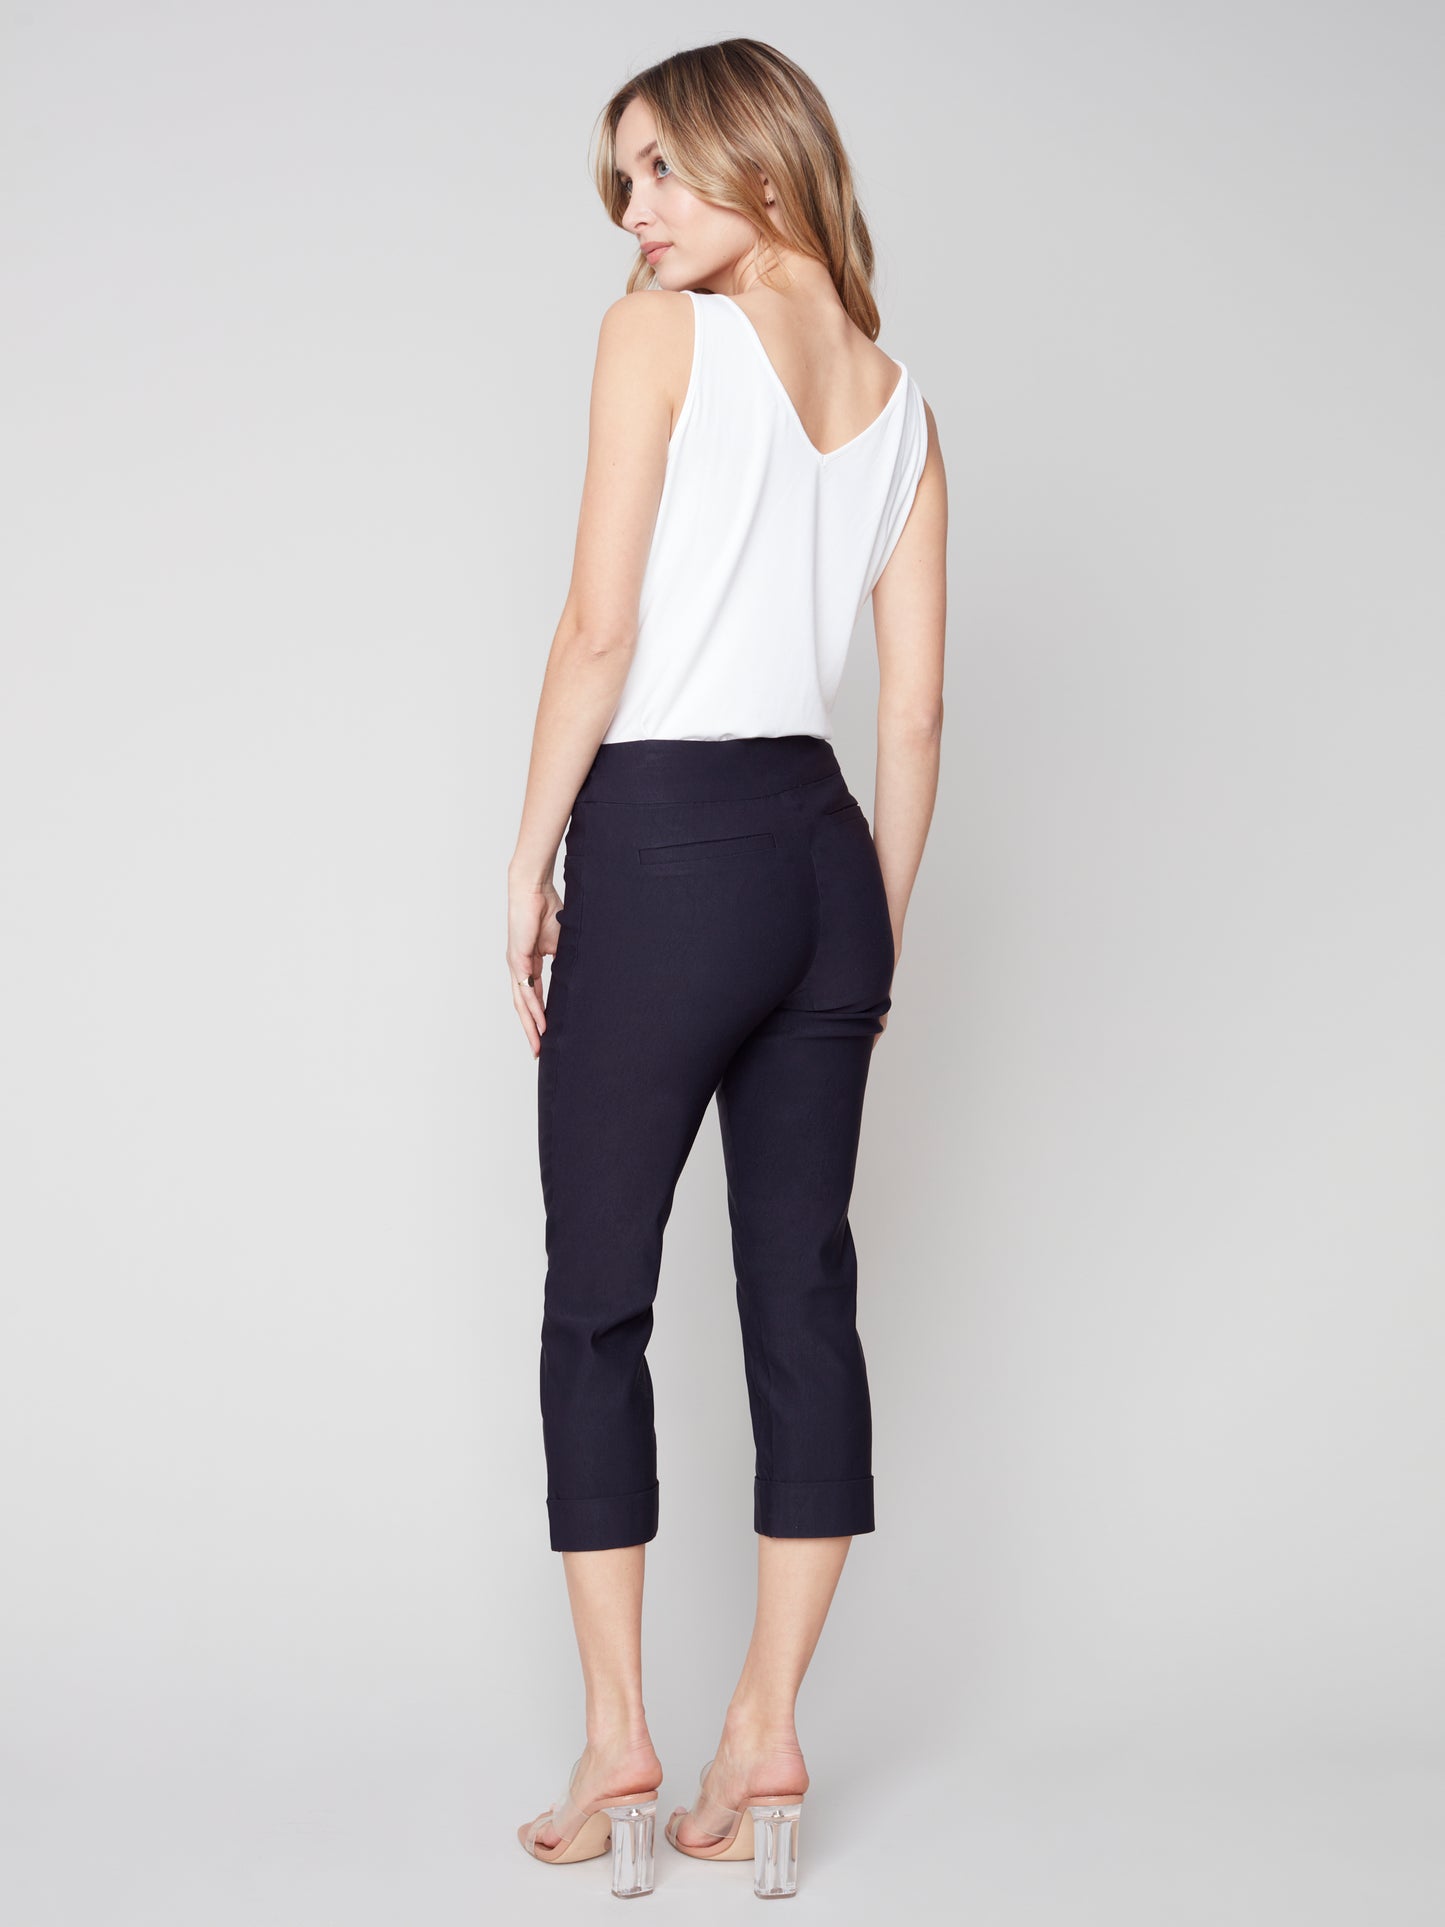 Solid Stretch Pant